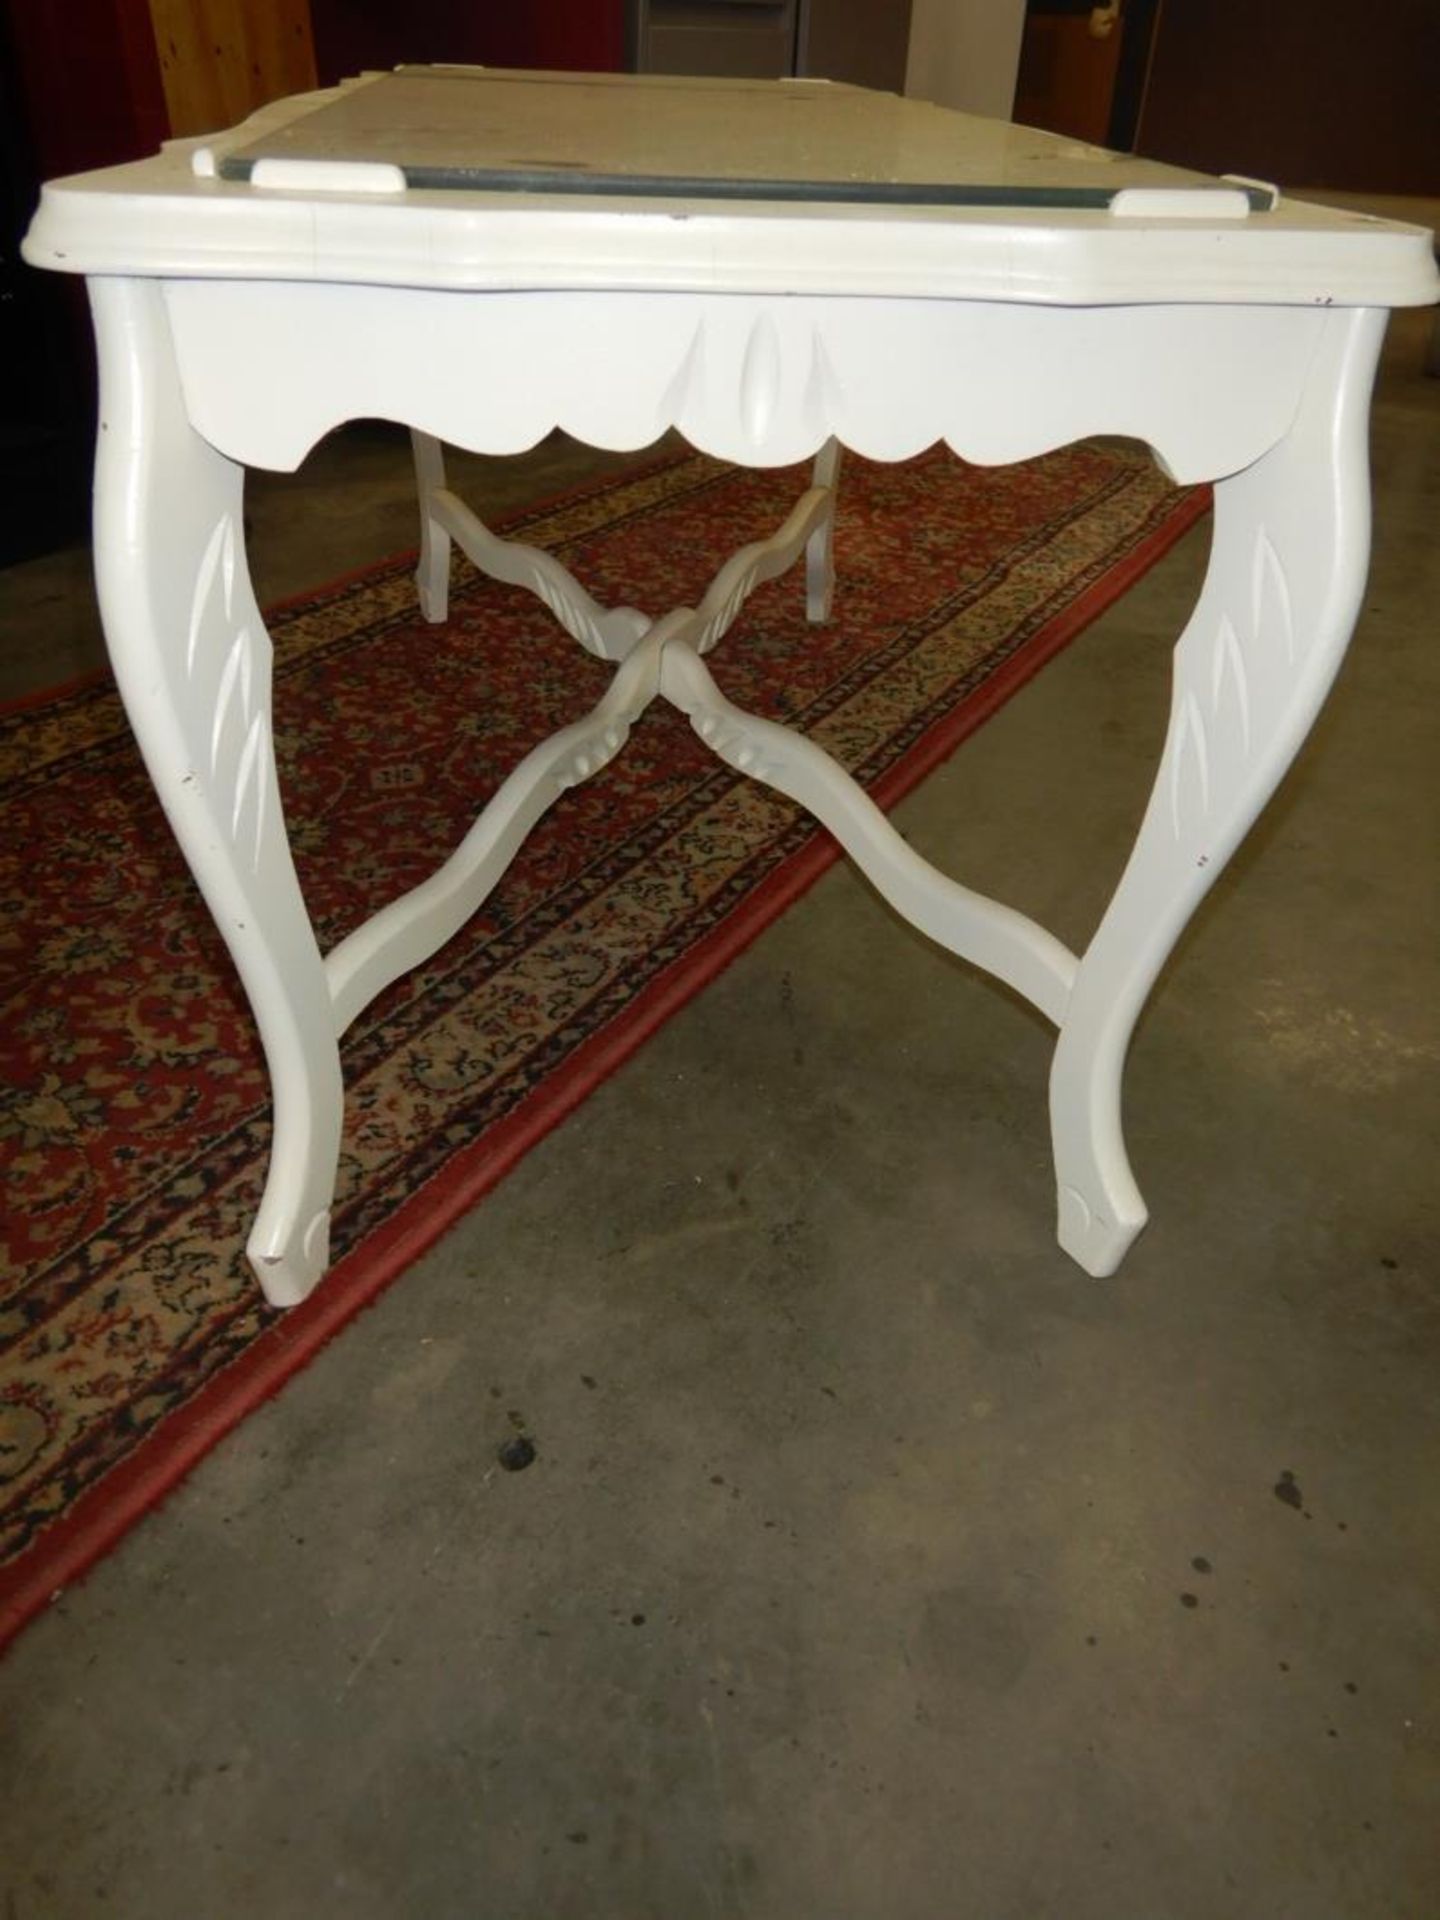 ANTIQUE COFFEE TABLE PAINTED OFF WHITE, W/GLASS INSET TOP-33 3/4"W X 17"D X 17 1/4"H - Image 3 of 3